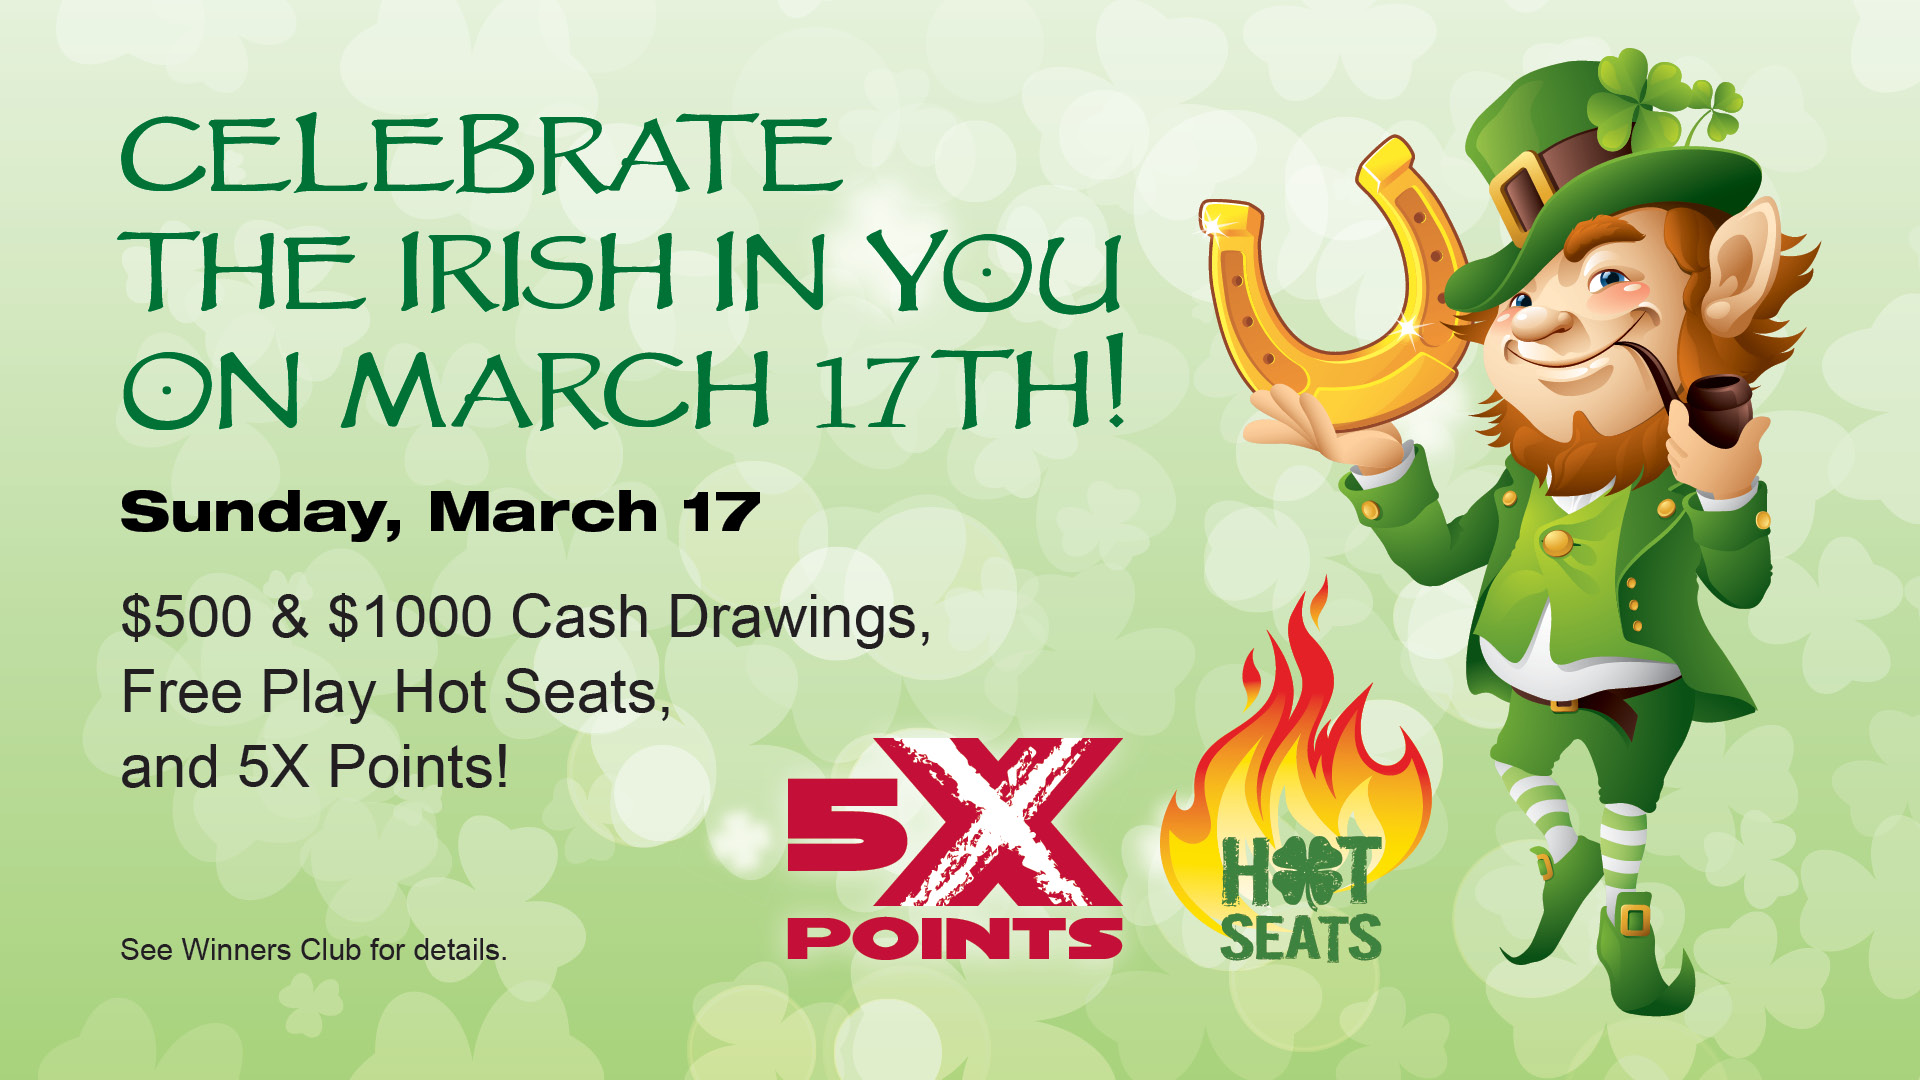 Celebrate the Irish in you on March 17th! Sunday, March 17. $500 & $1000 Cash Drawings, Free Play Hot Seats, and 5X Points! See Winners Club for details.